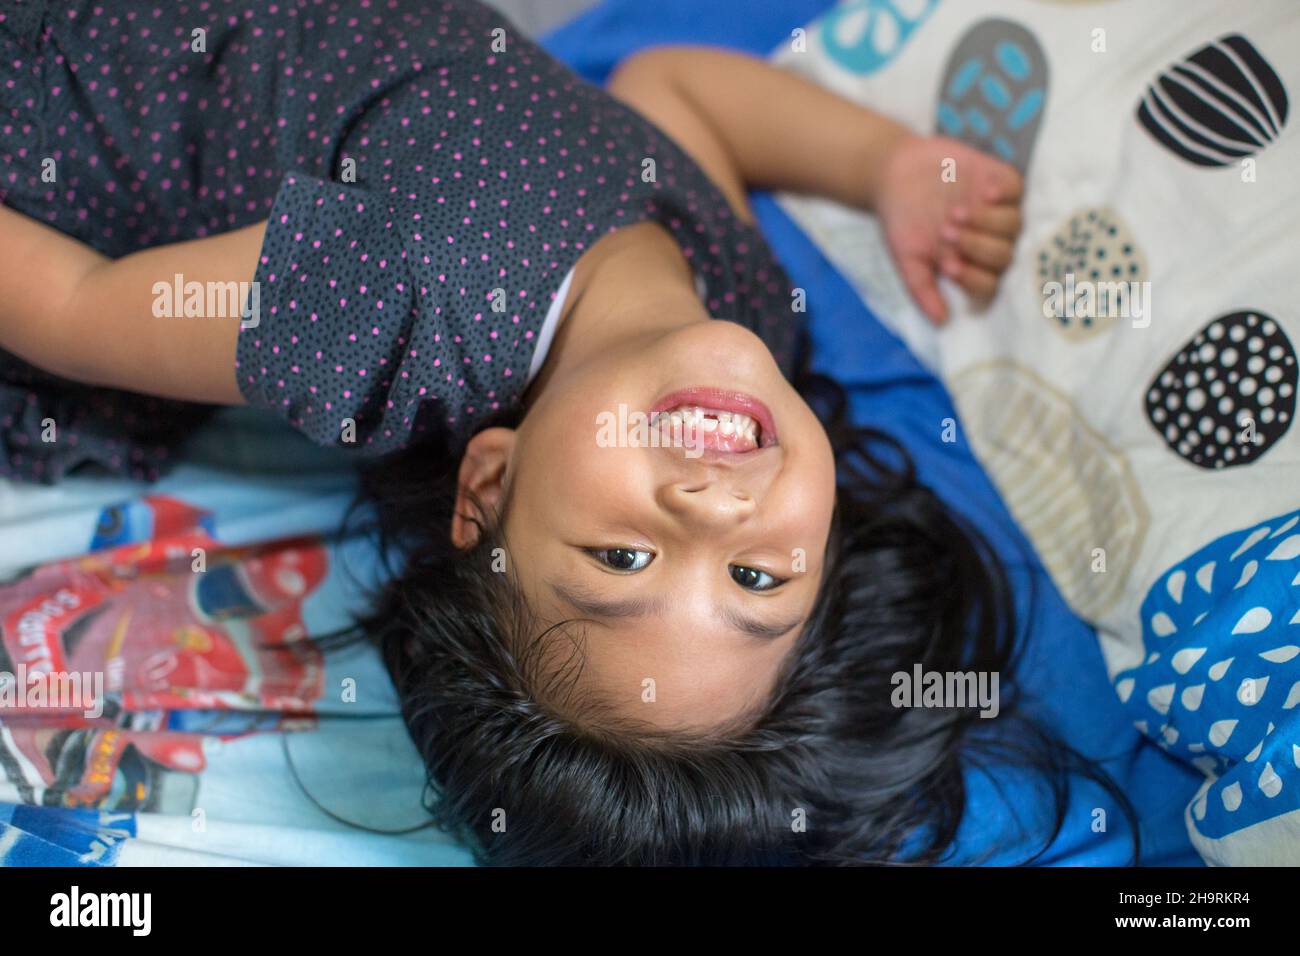 A beautiful little girl with long black hair with missing teeth smiling on the bed, shoot from high angle Stock Photo